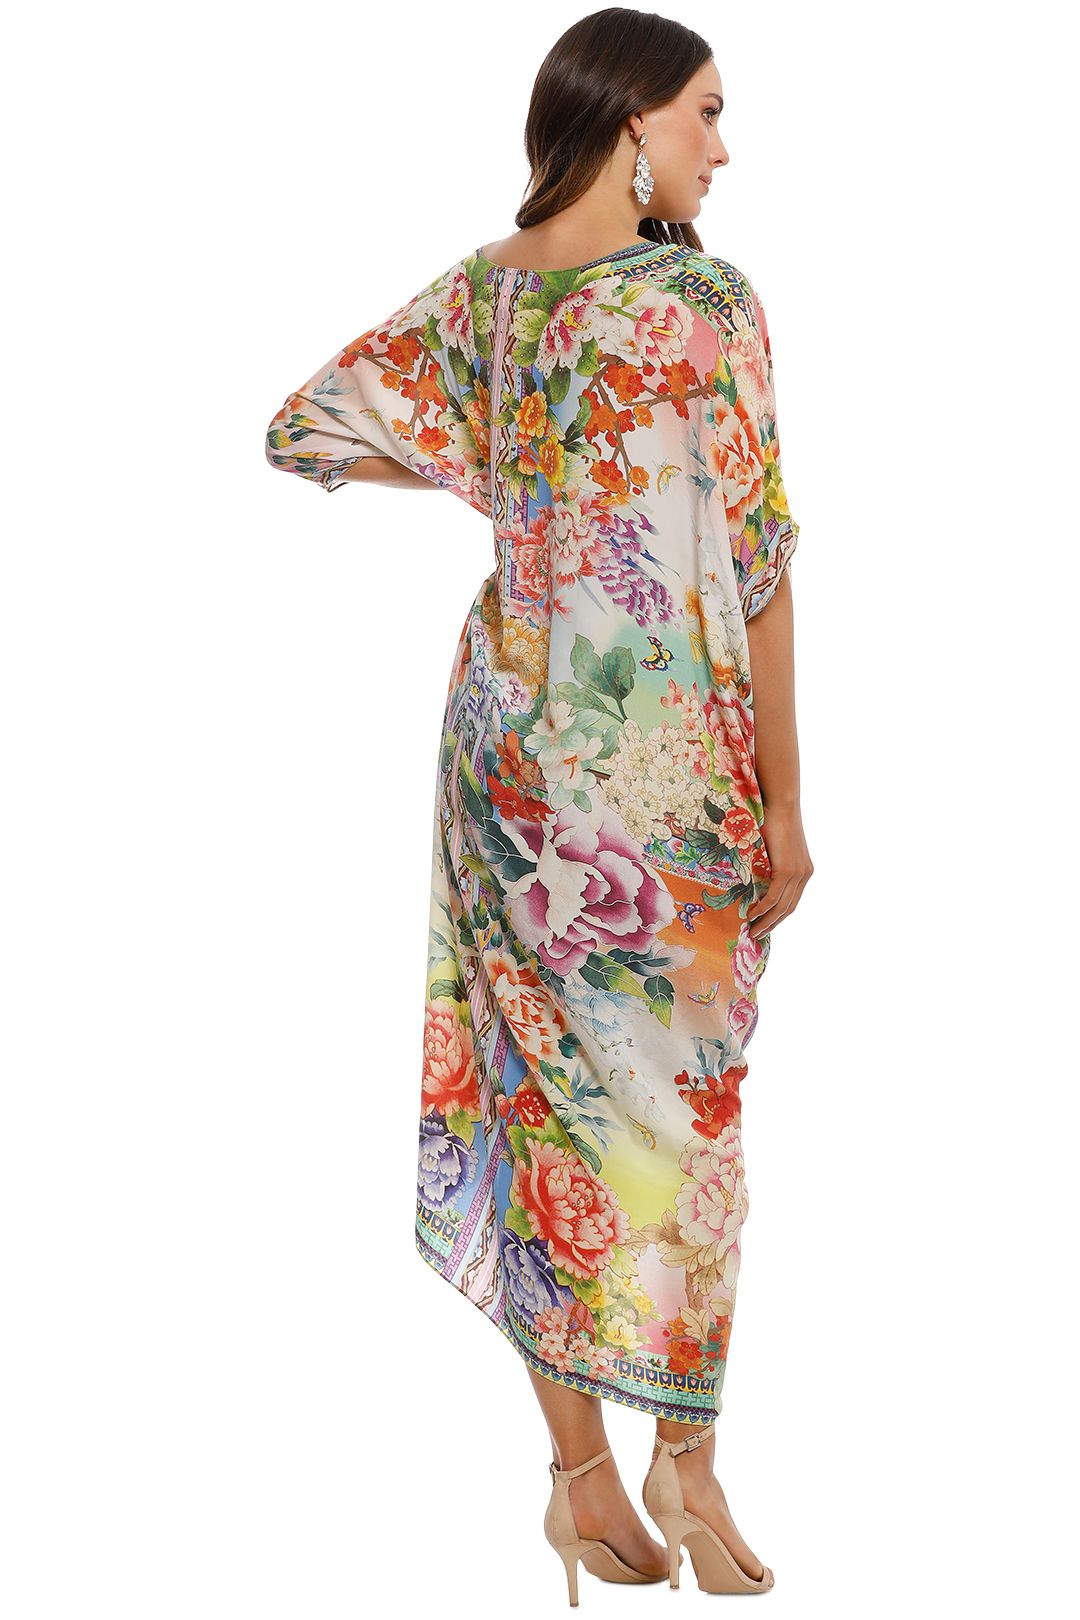 Flower Hour Round Neck Kaftan by Camilla for Rent